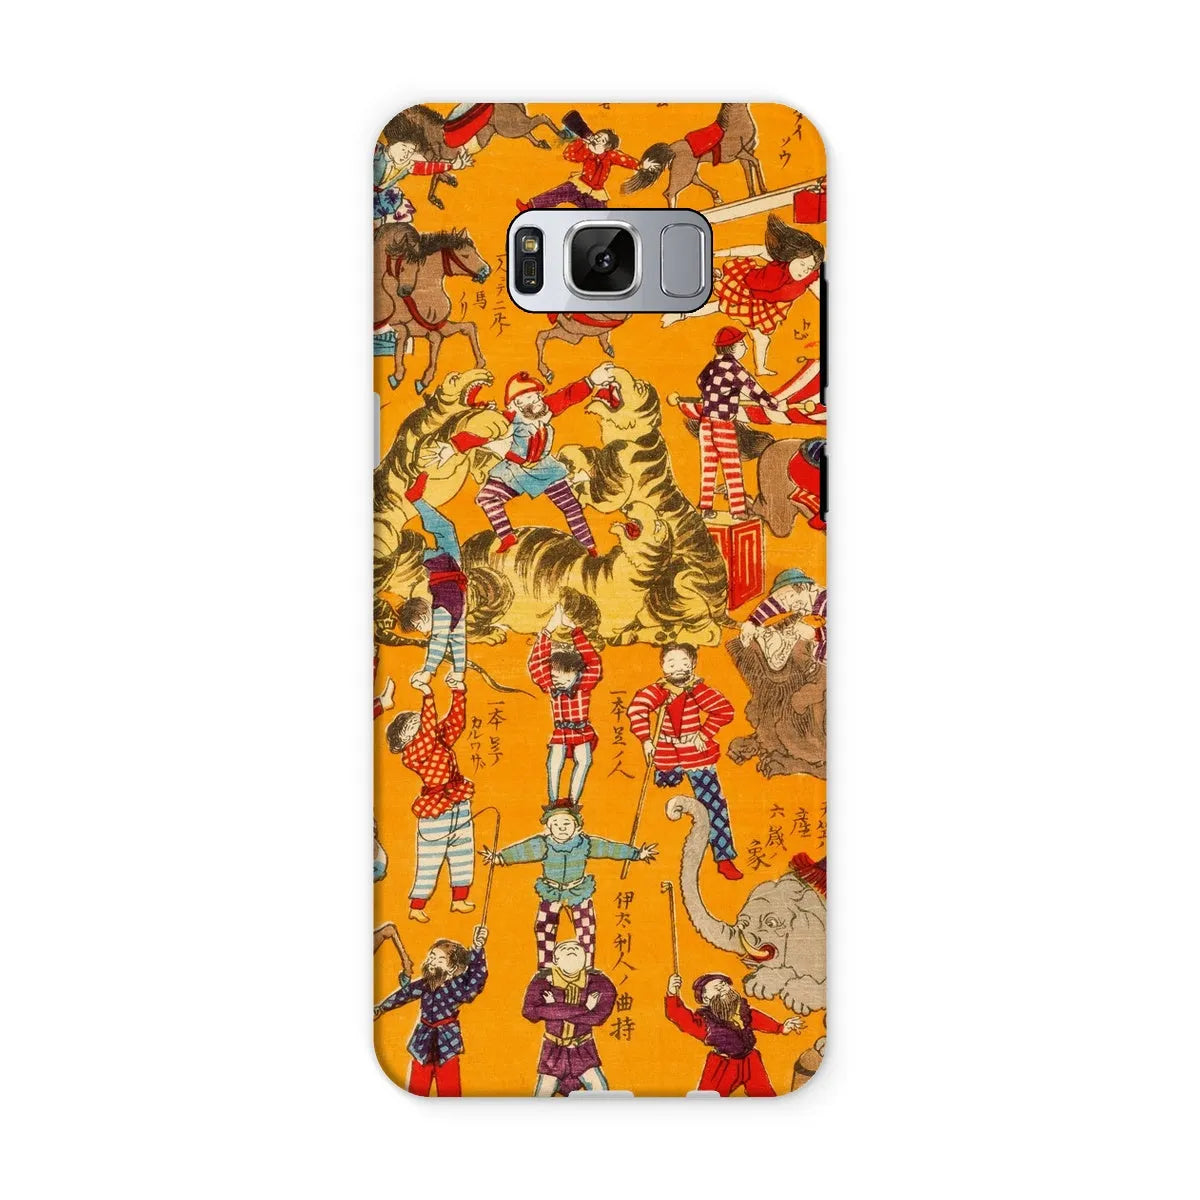 Japanese Circus Aesthetic Art Phone Case - Samsung Galaxy S8 / Matte - Mobile Phone Cases - Aesthetic Art